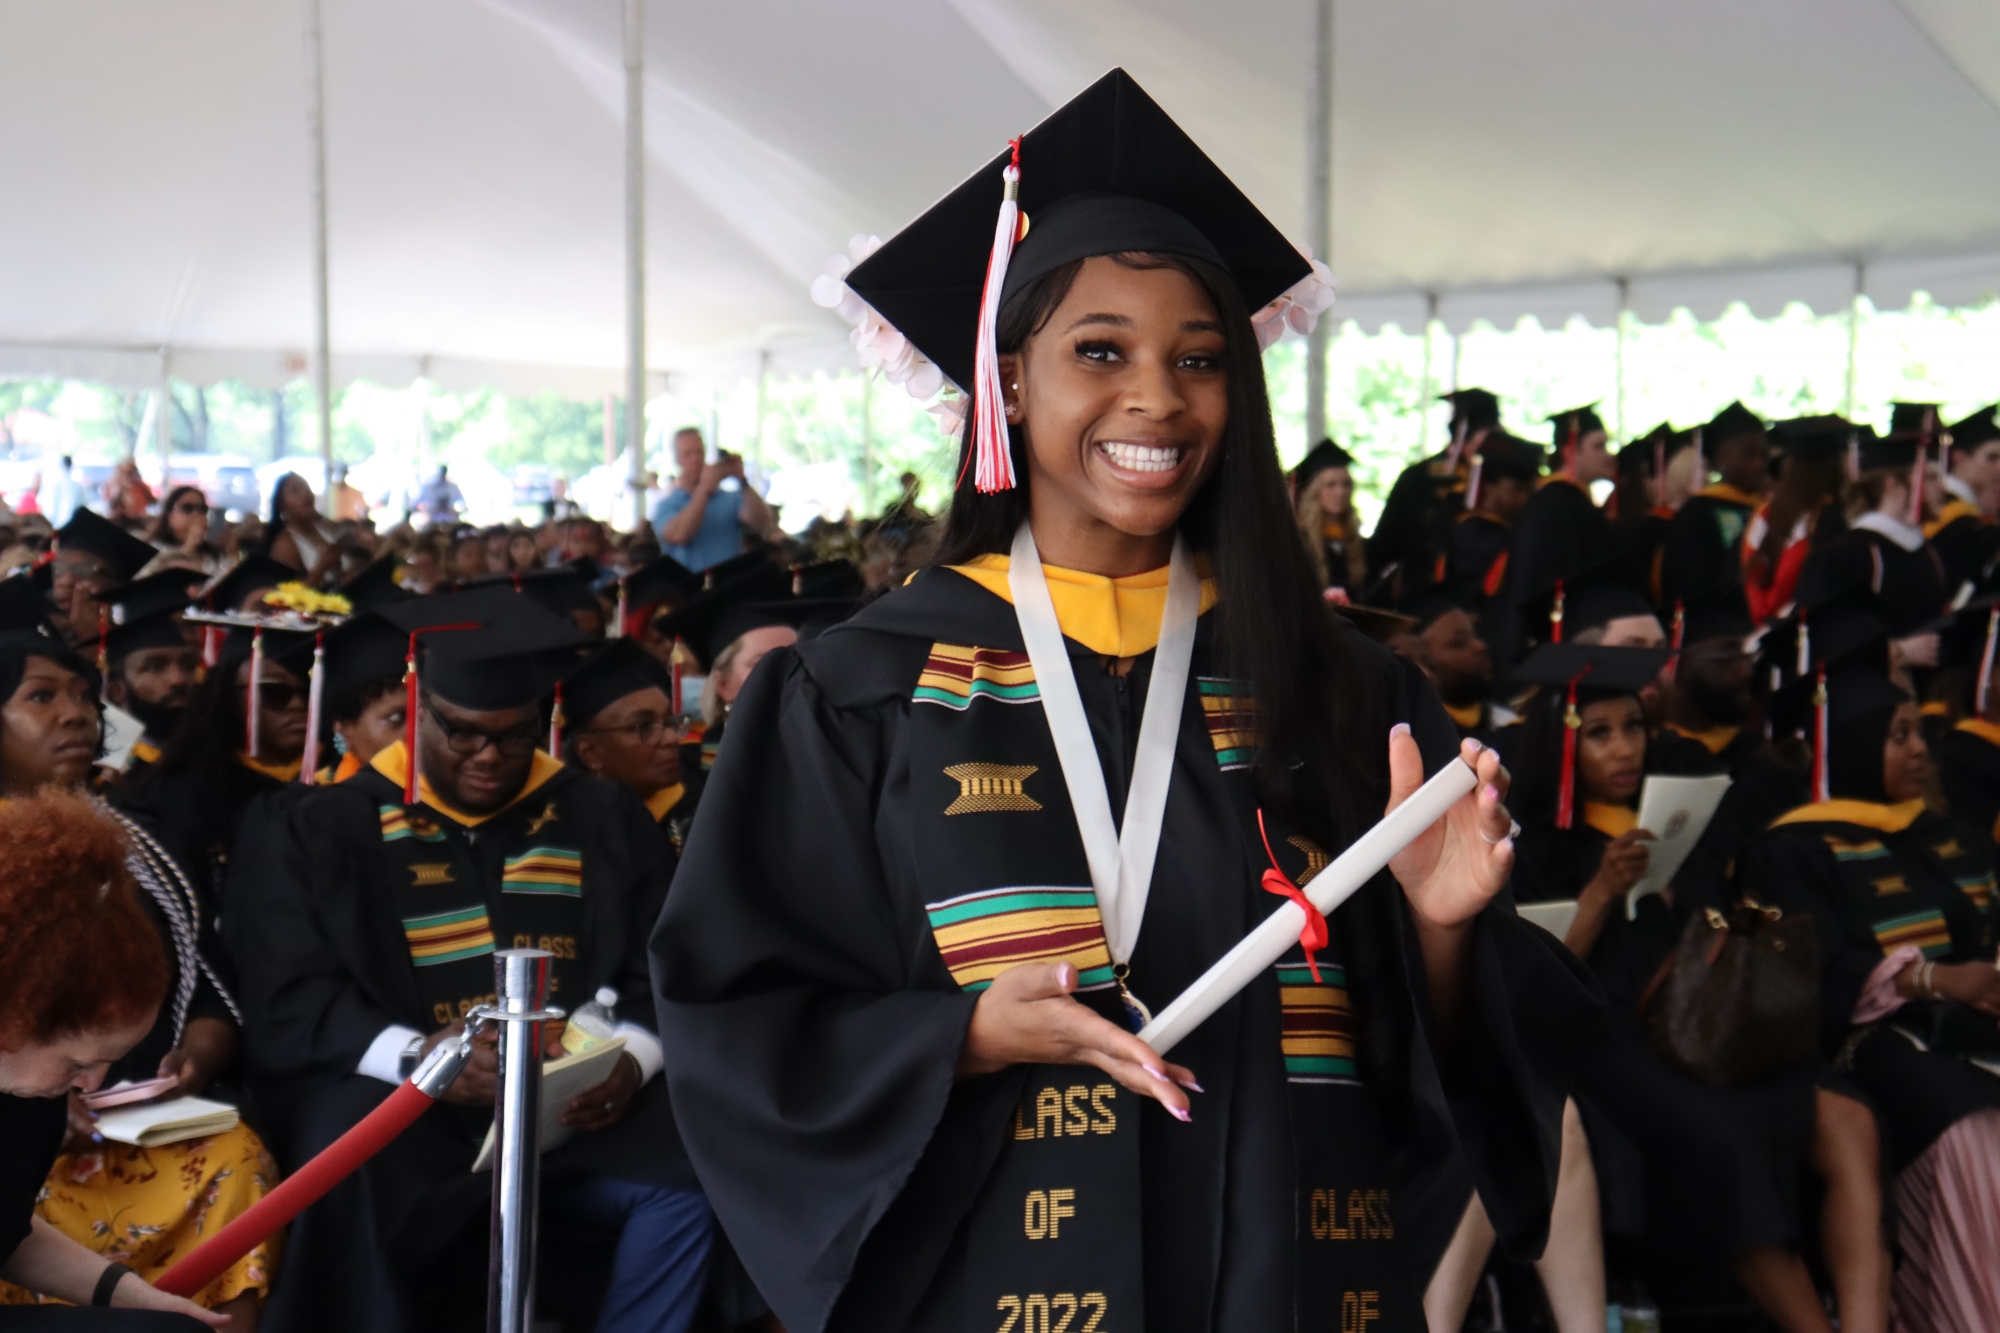 Graduates stopped and posed for photos with their diplomas after walking across the stage during Saturday's ceremony for the Class of 2022.